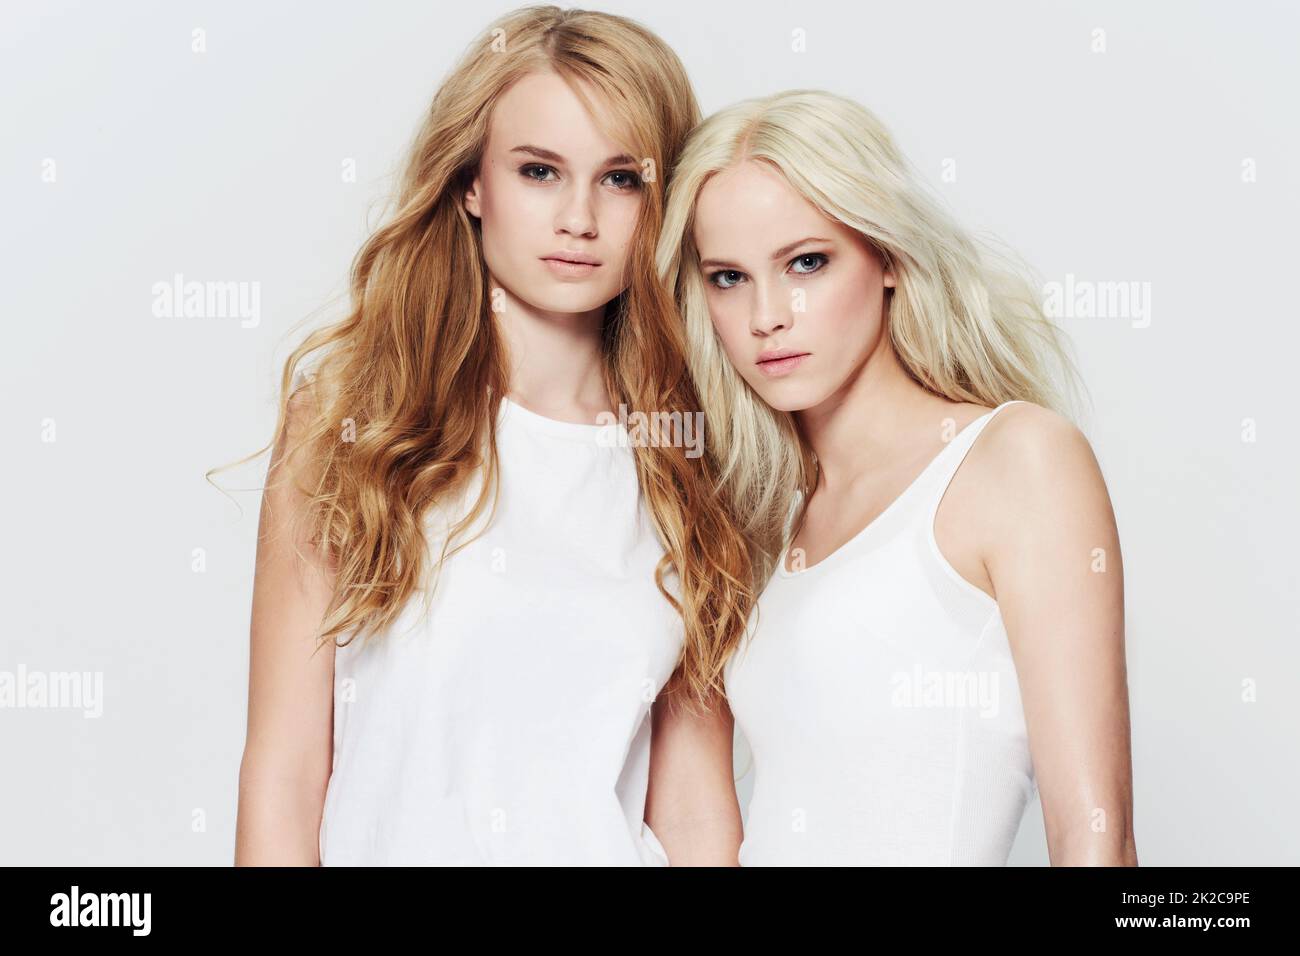 Looking naturally beautiful. Studio portrait of two young models against a white background. Stock Photo